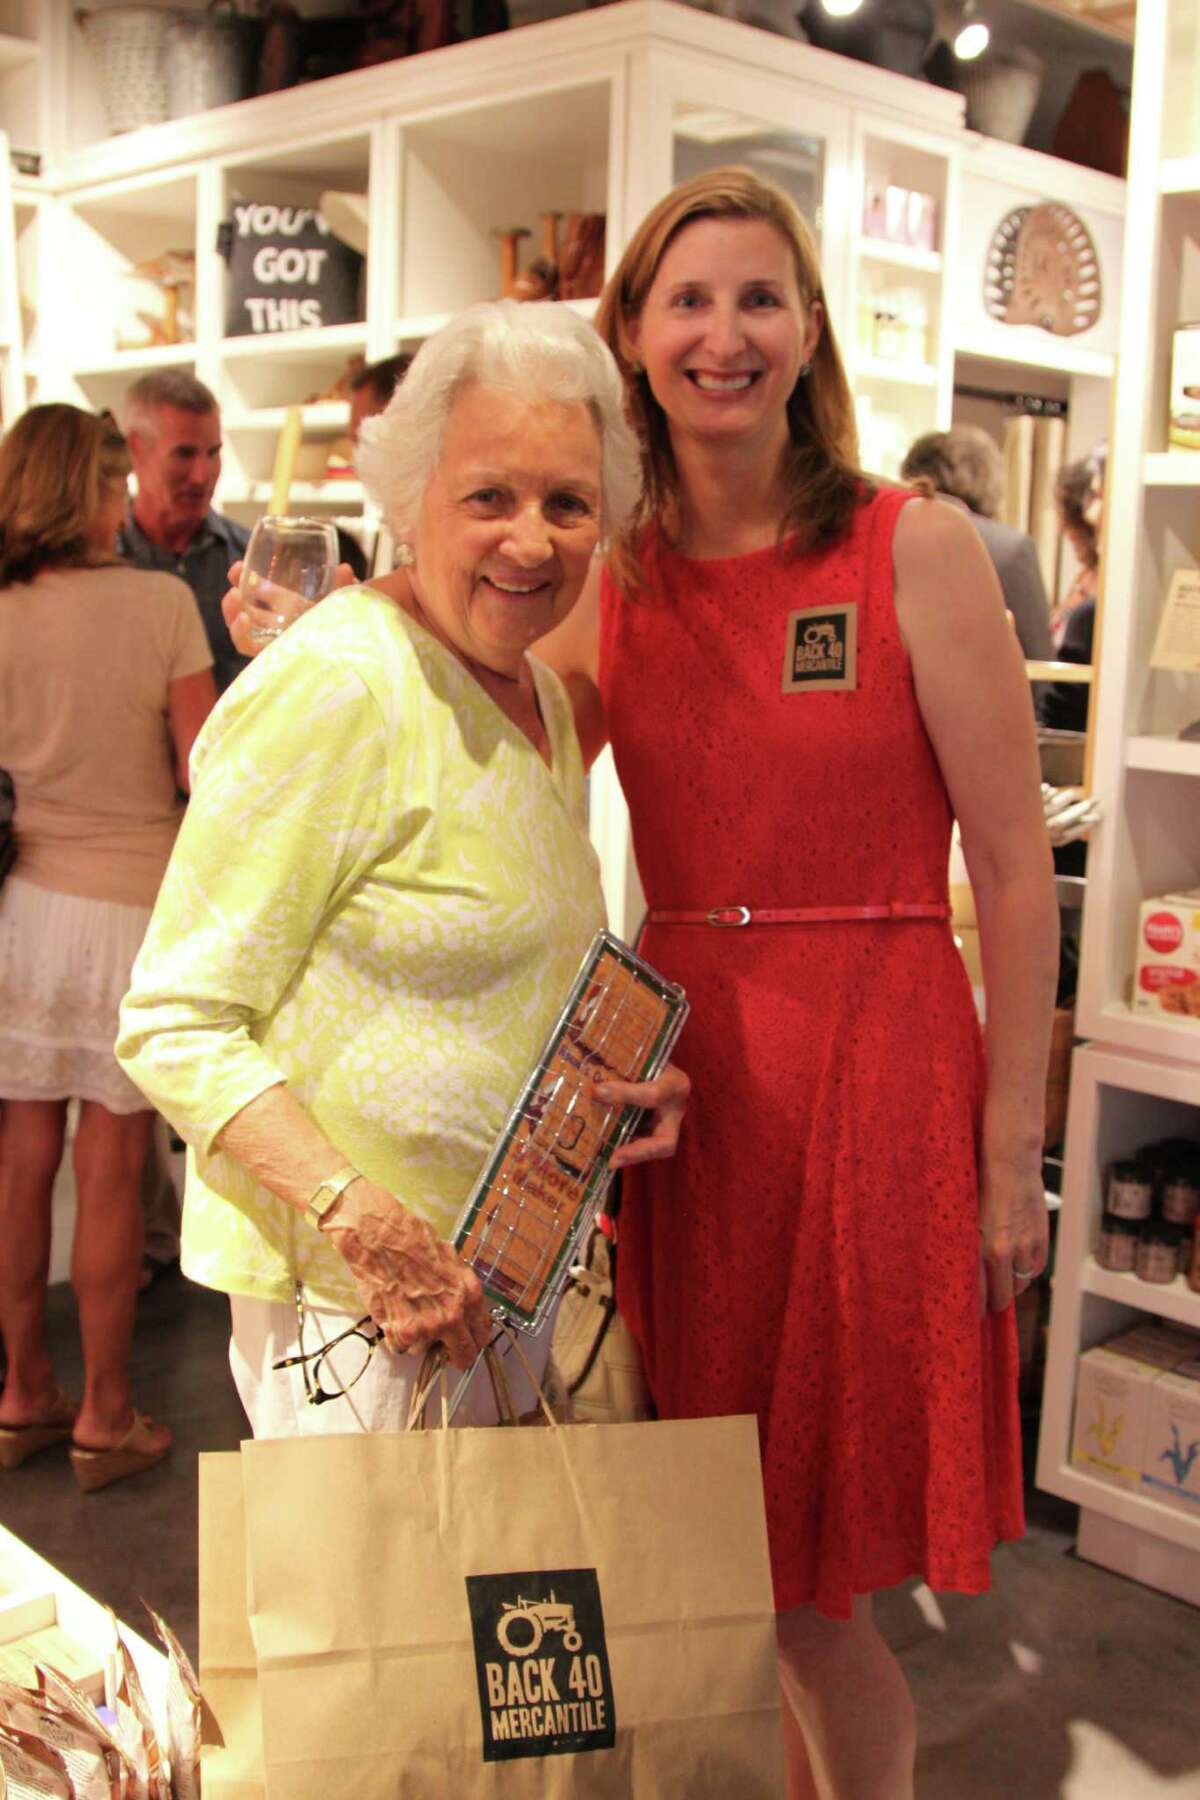 Lesley King, right, co-owner of Back 40 Mercantile, welcomes her neighbor, Old Greenwich native Sue Millard to Back 40's opening party in Old Greenwich on Wednesday evening.